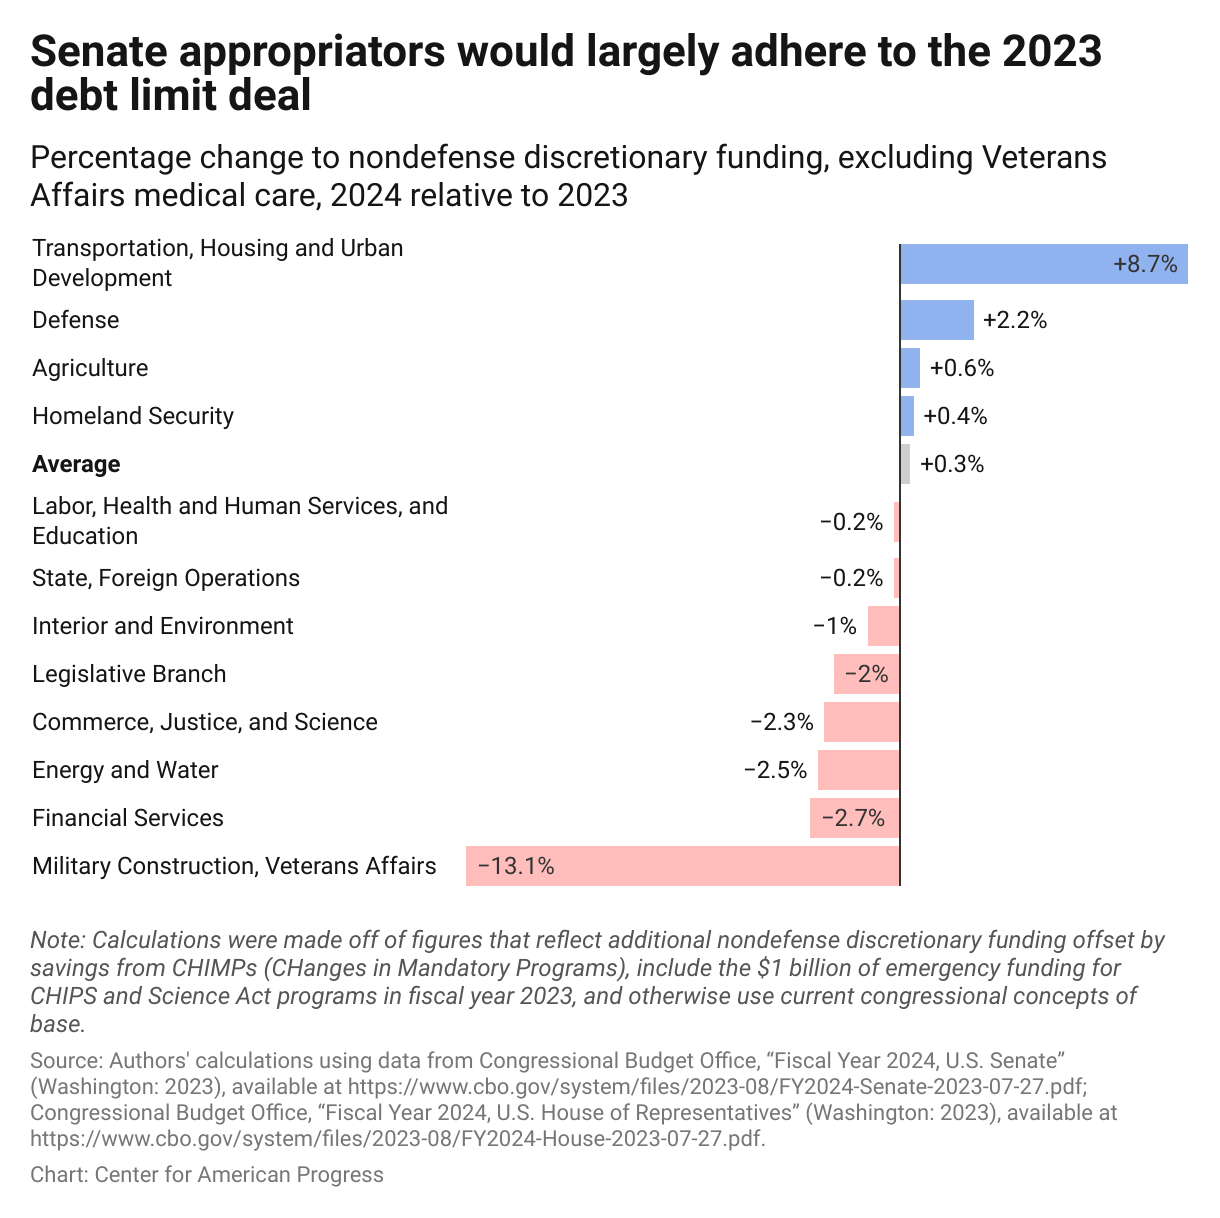 Bar graph showing Senate appropriators' plan, by Appropriations subcommittee bill, relative to fiscal year 2023, with an average increase of 0.3 percent.